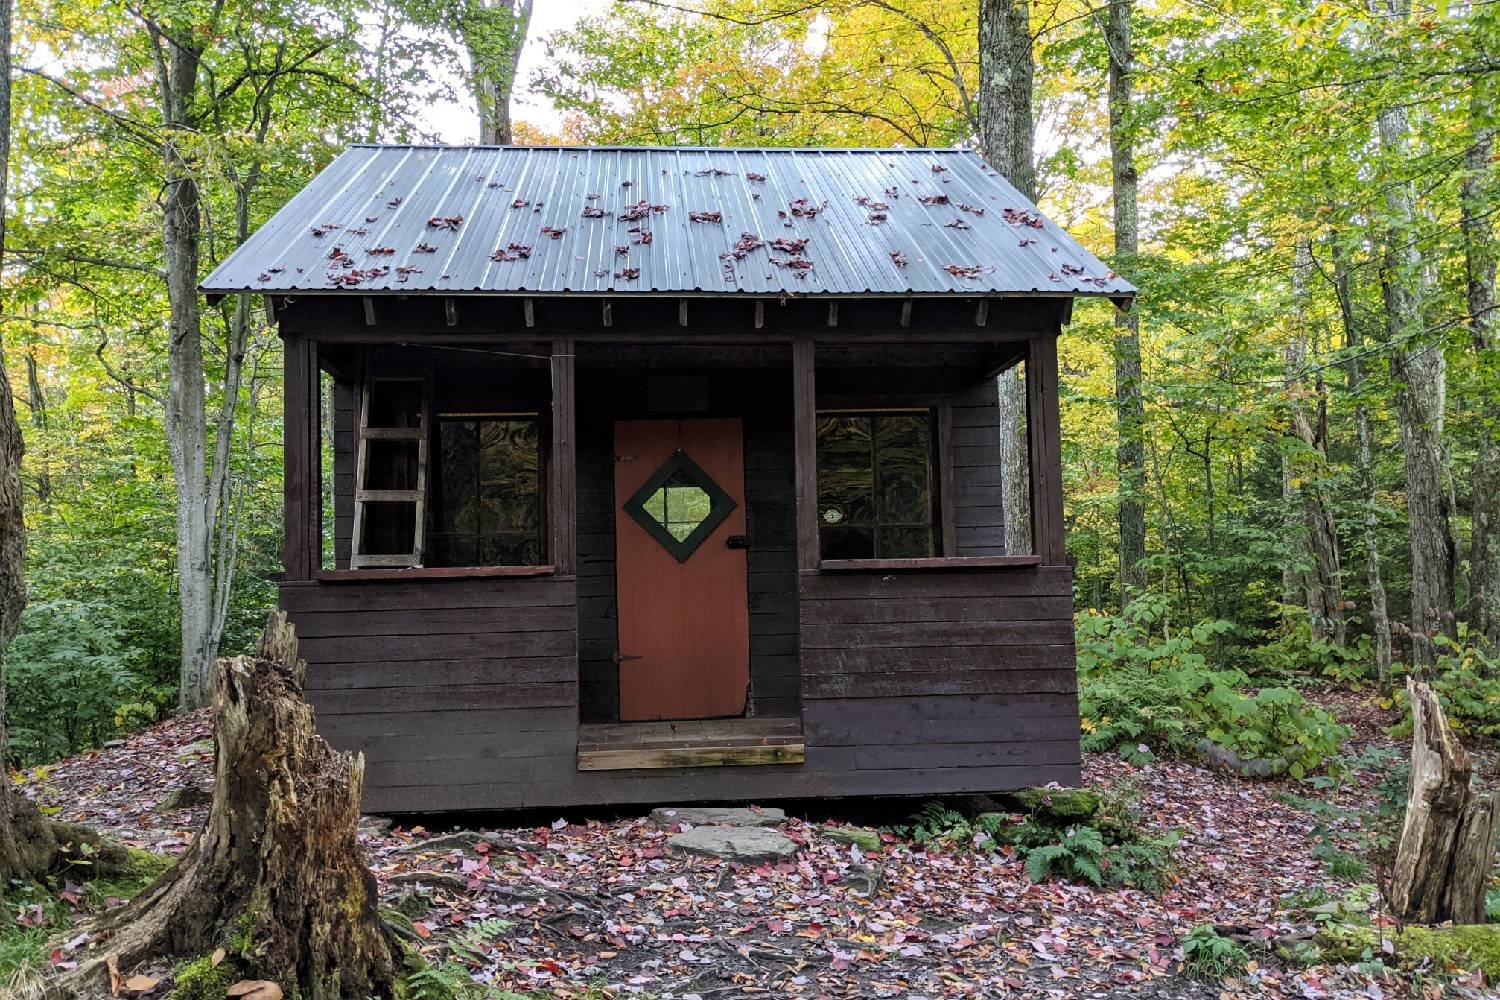 A Long Trail shelter that looks like a little house in the woods